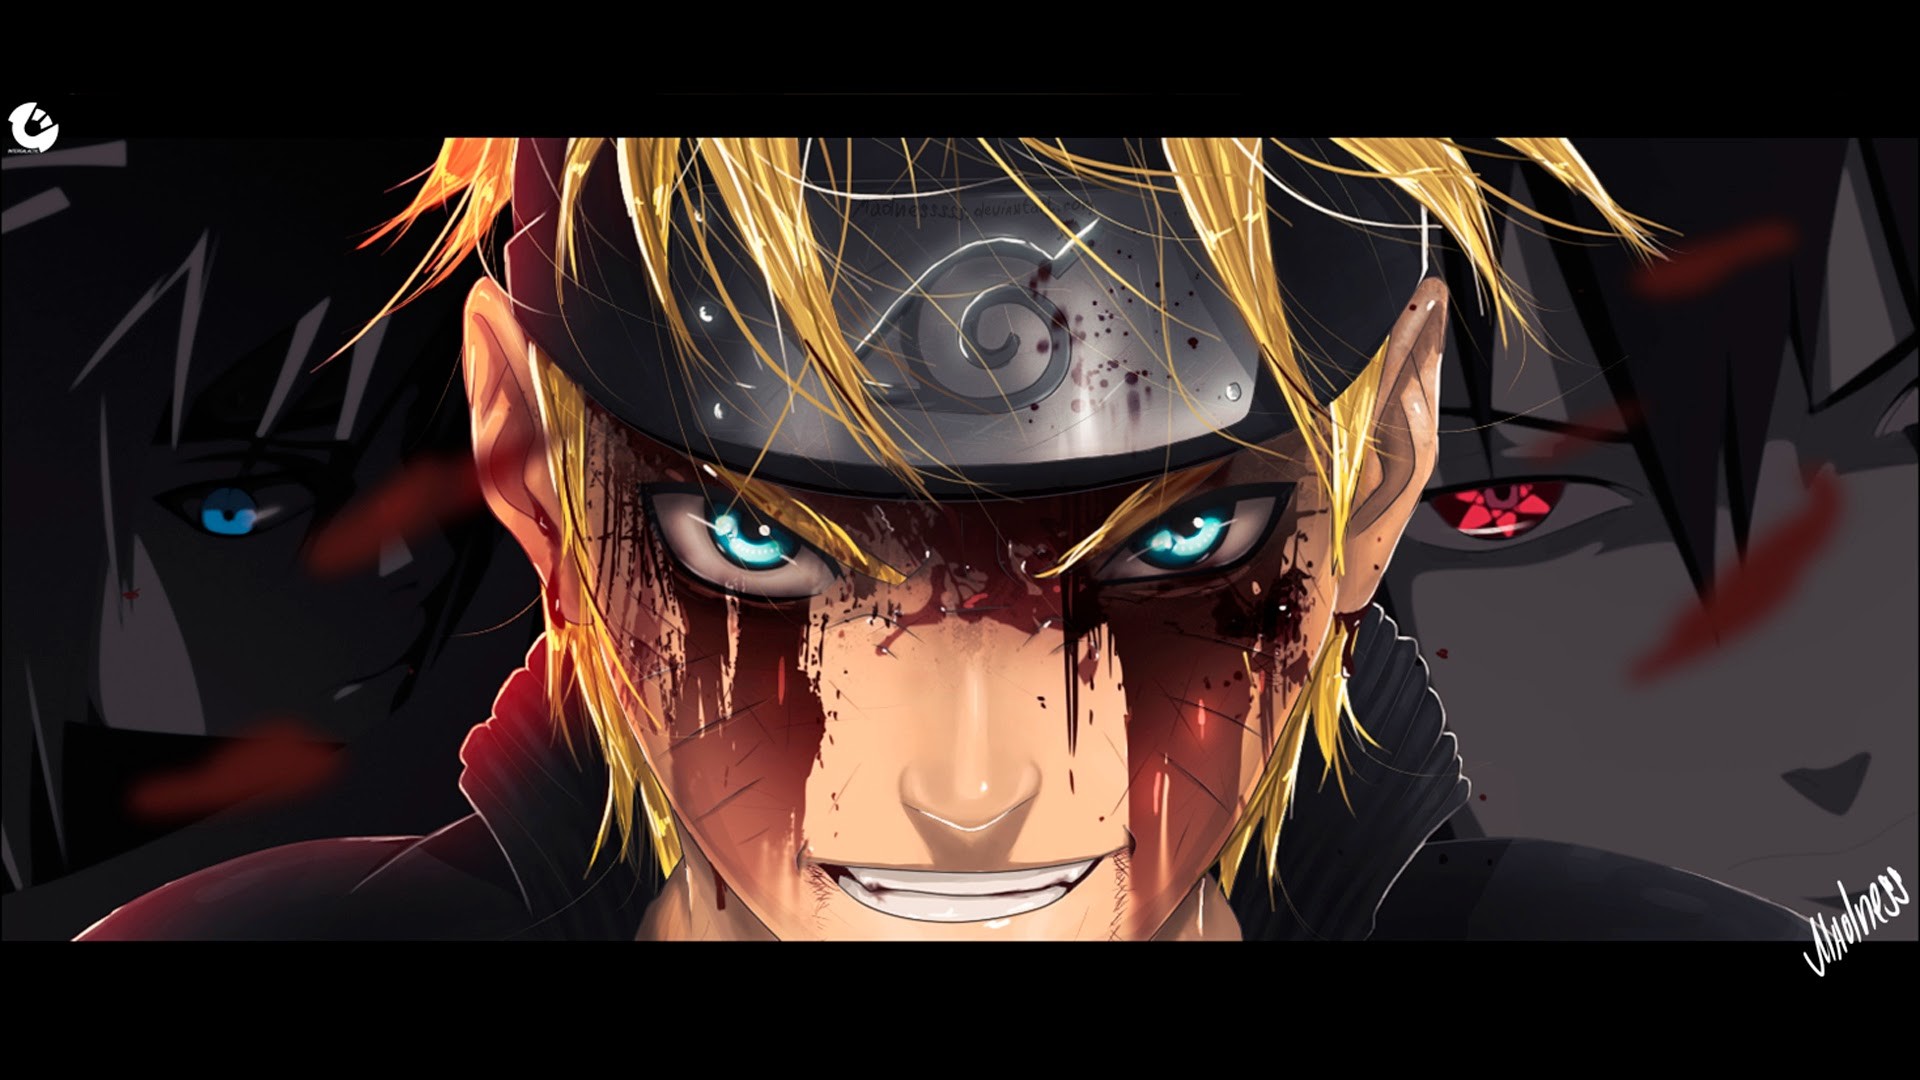 Athahdesigns Anime s-naruto-Wallpaper Paper Print - Animation & Cartoons  posters in India - Buy art, film, design, movie, music, nature and  educational paintings/wallpapers at Flipkart.com